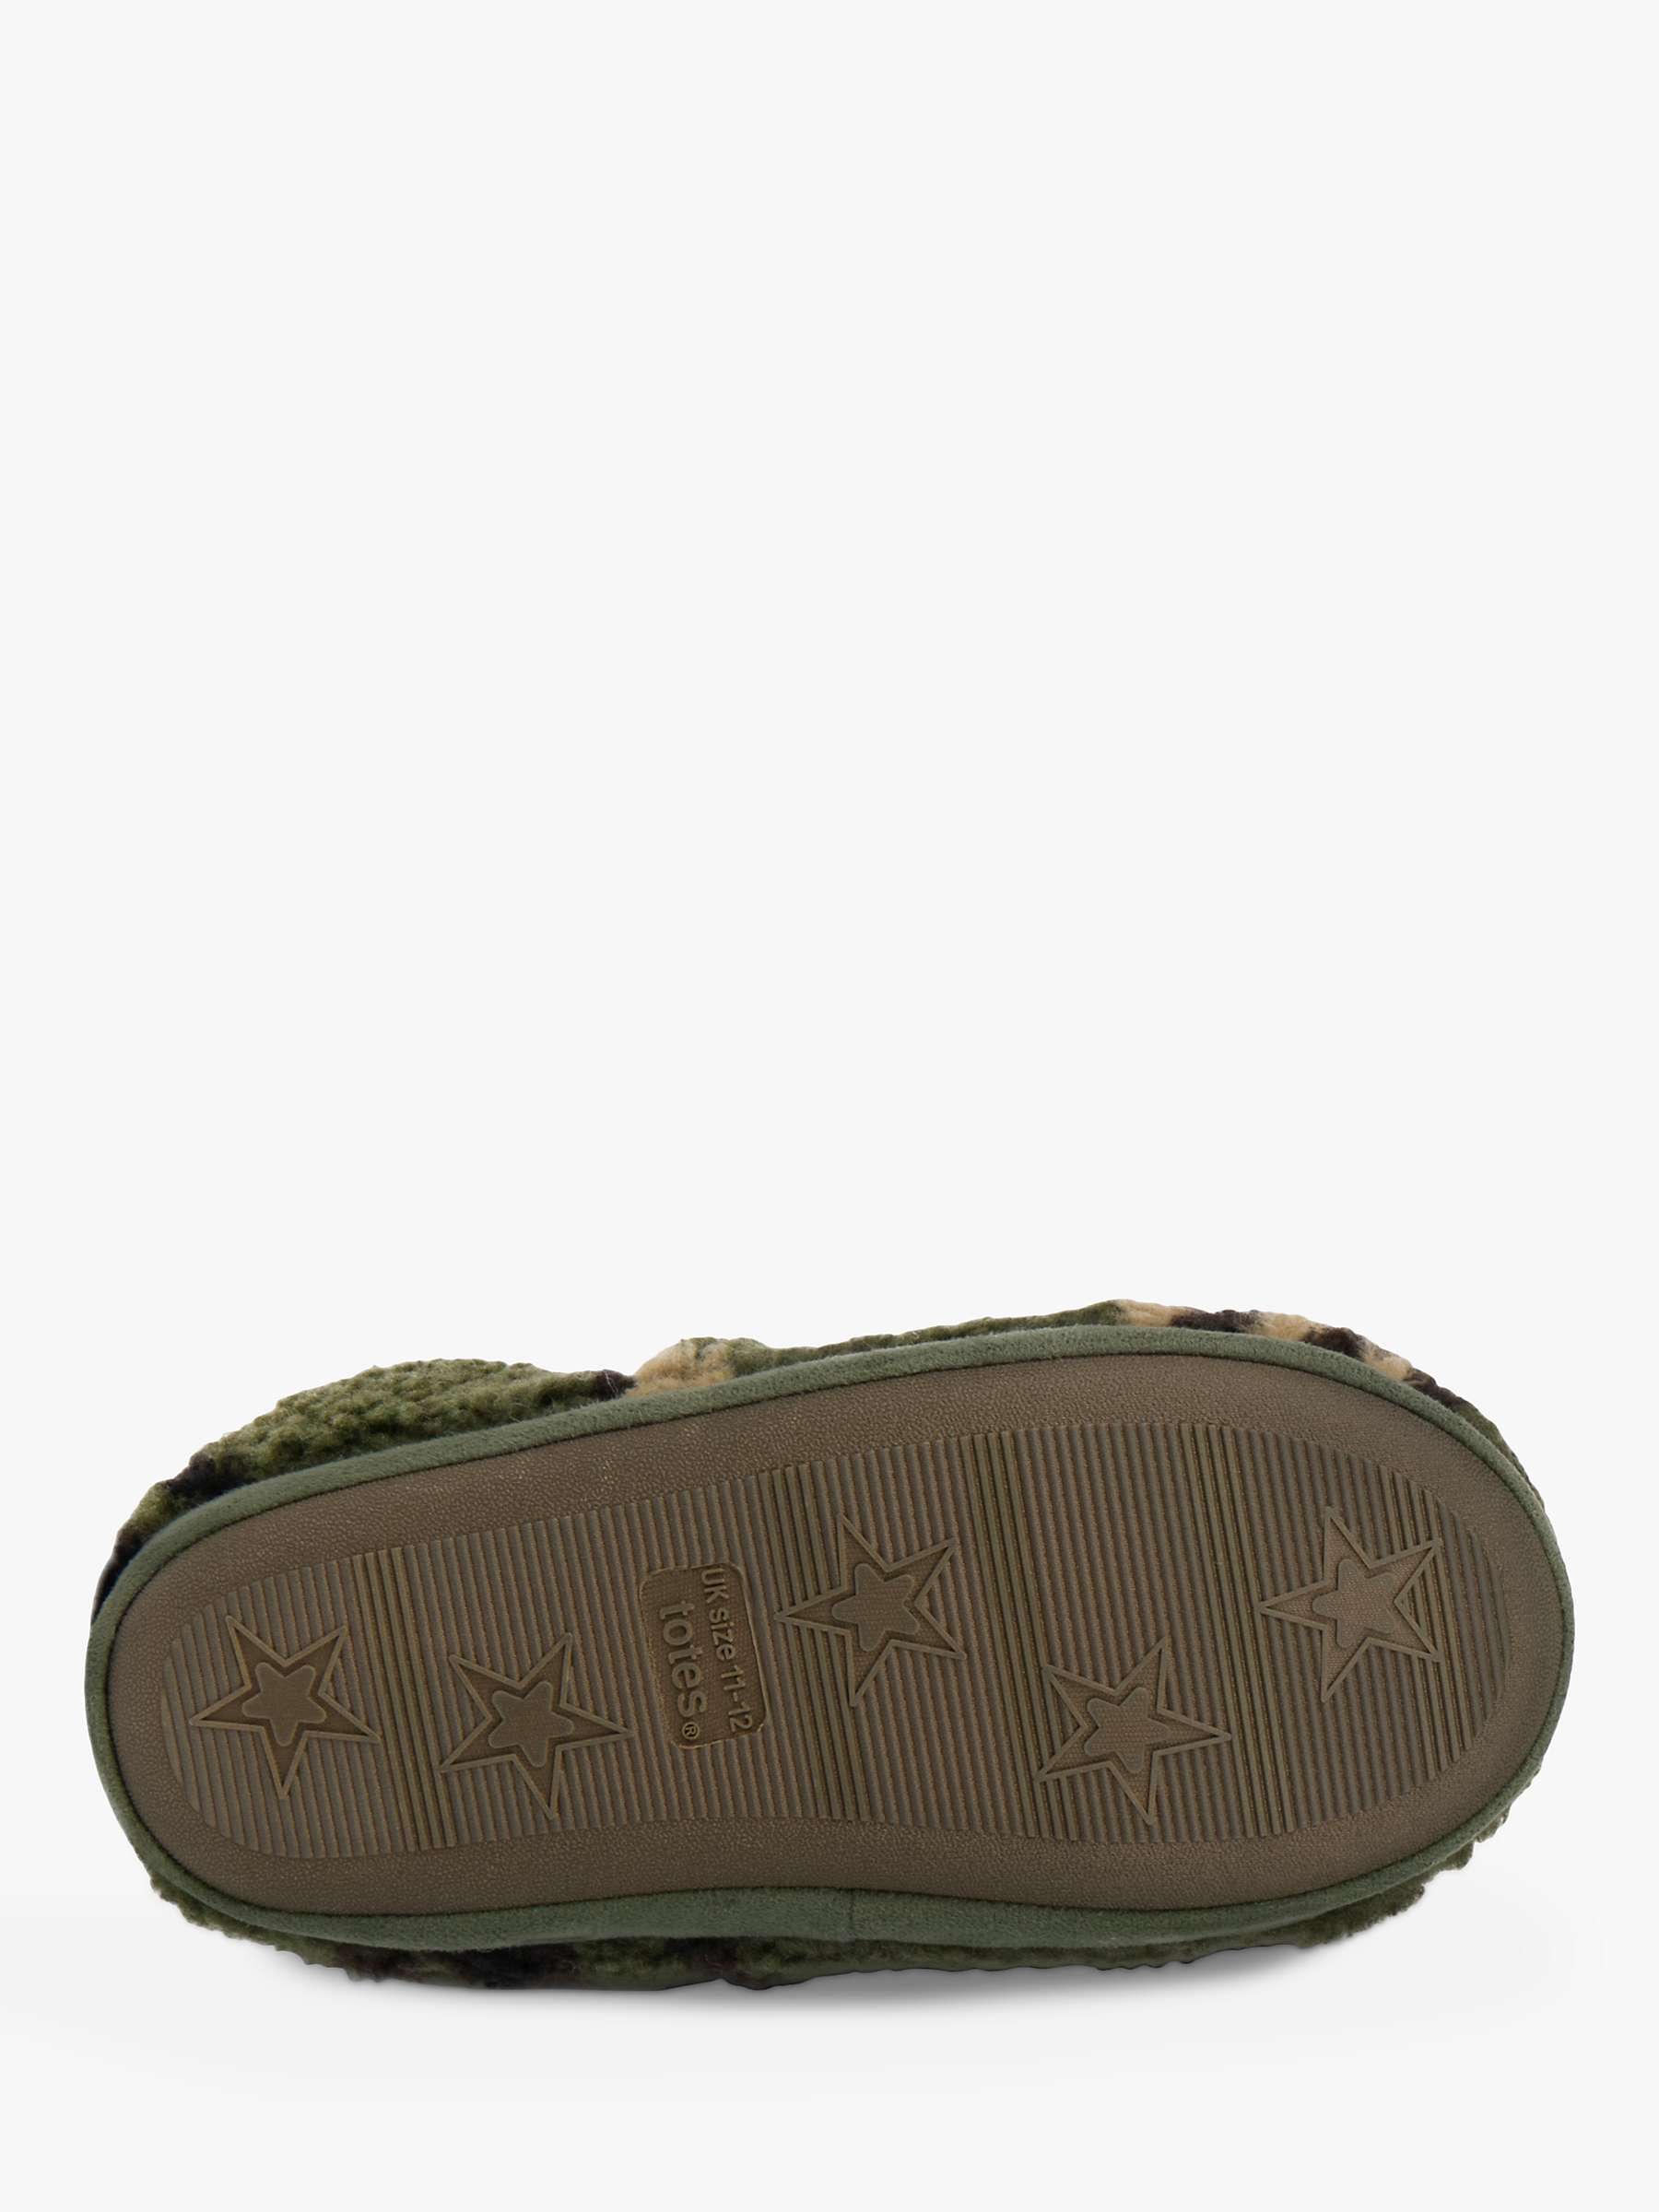 Buy totes Kids' Camouflage Slippers, Green/Black Online at johnlewis.com